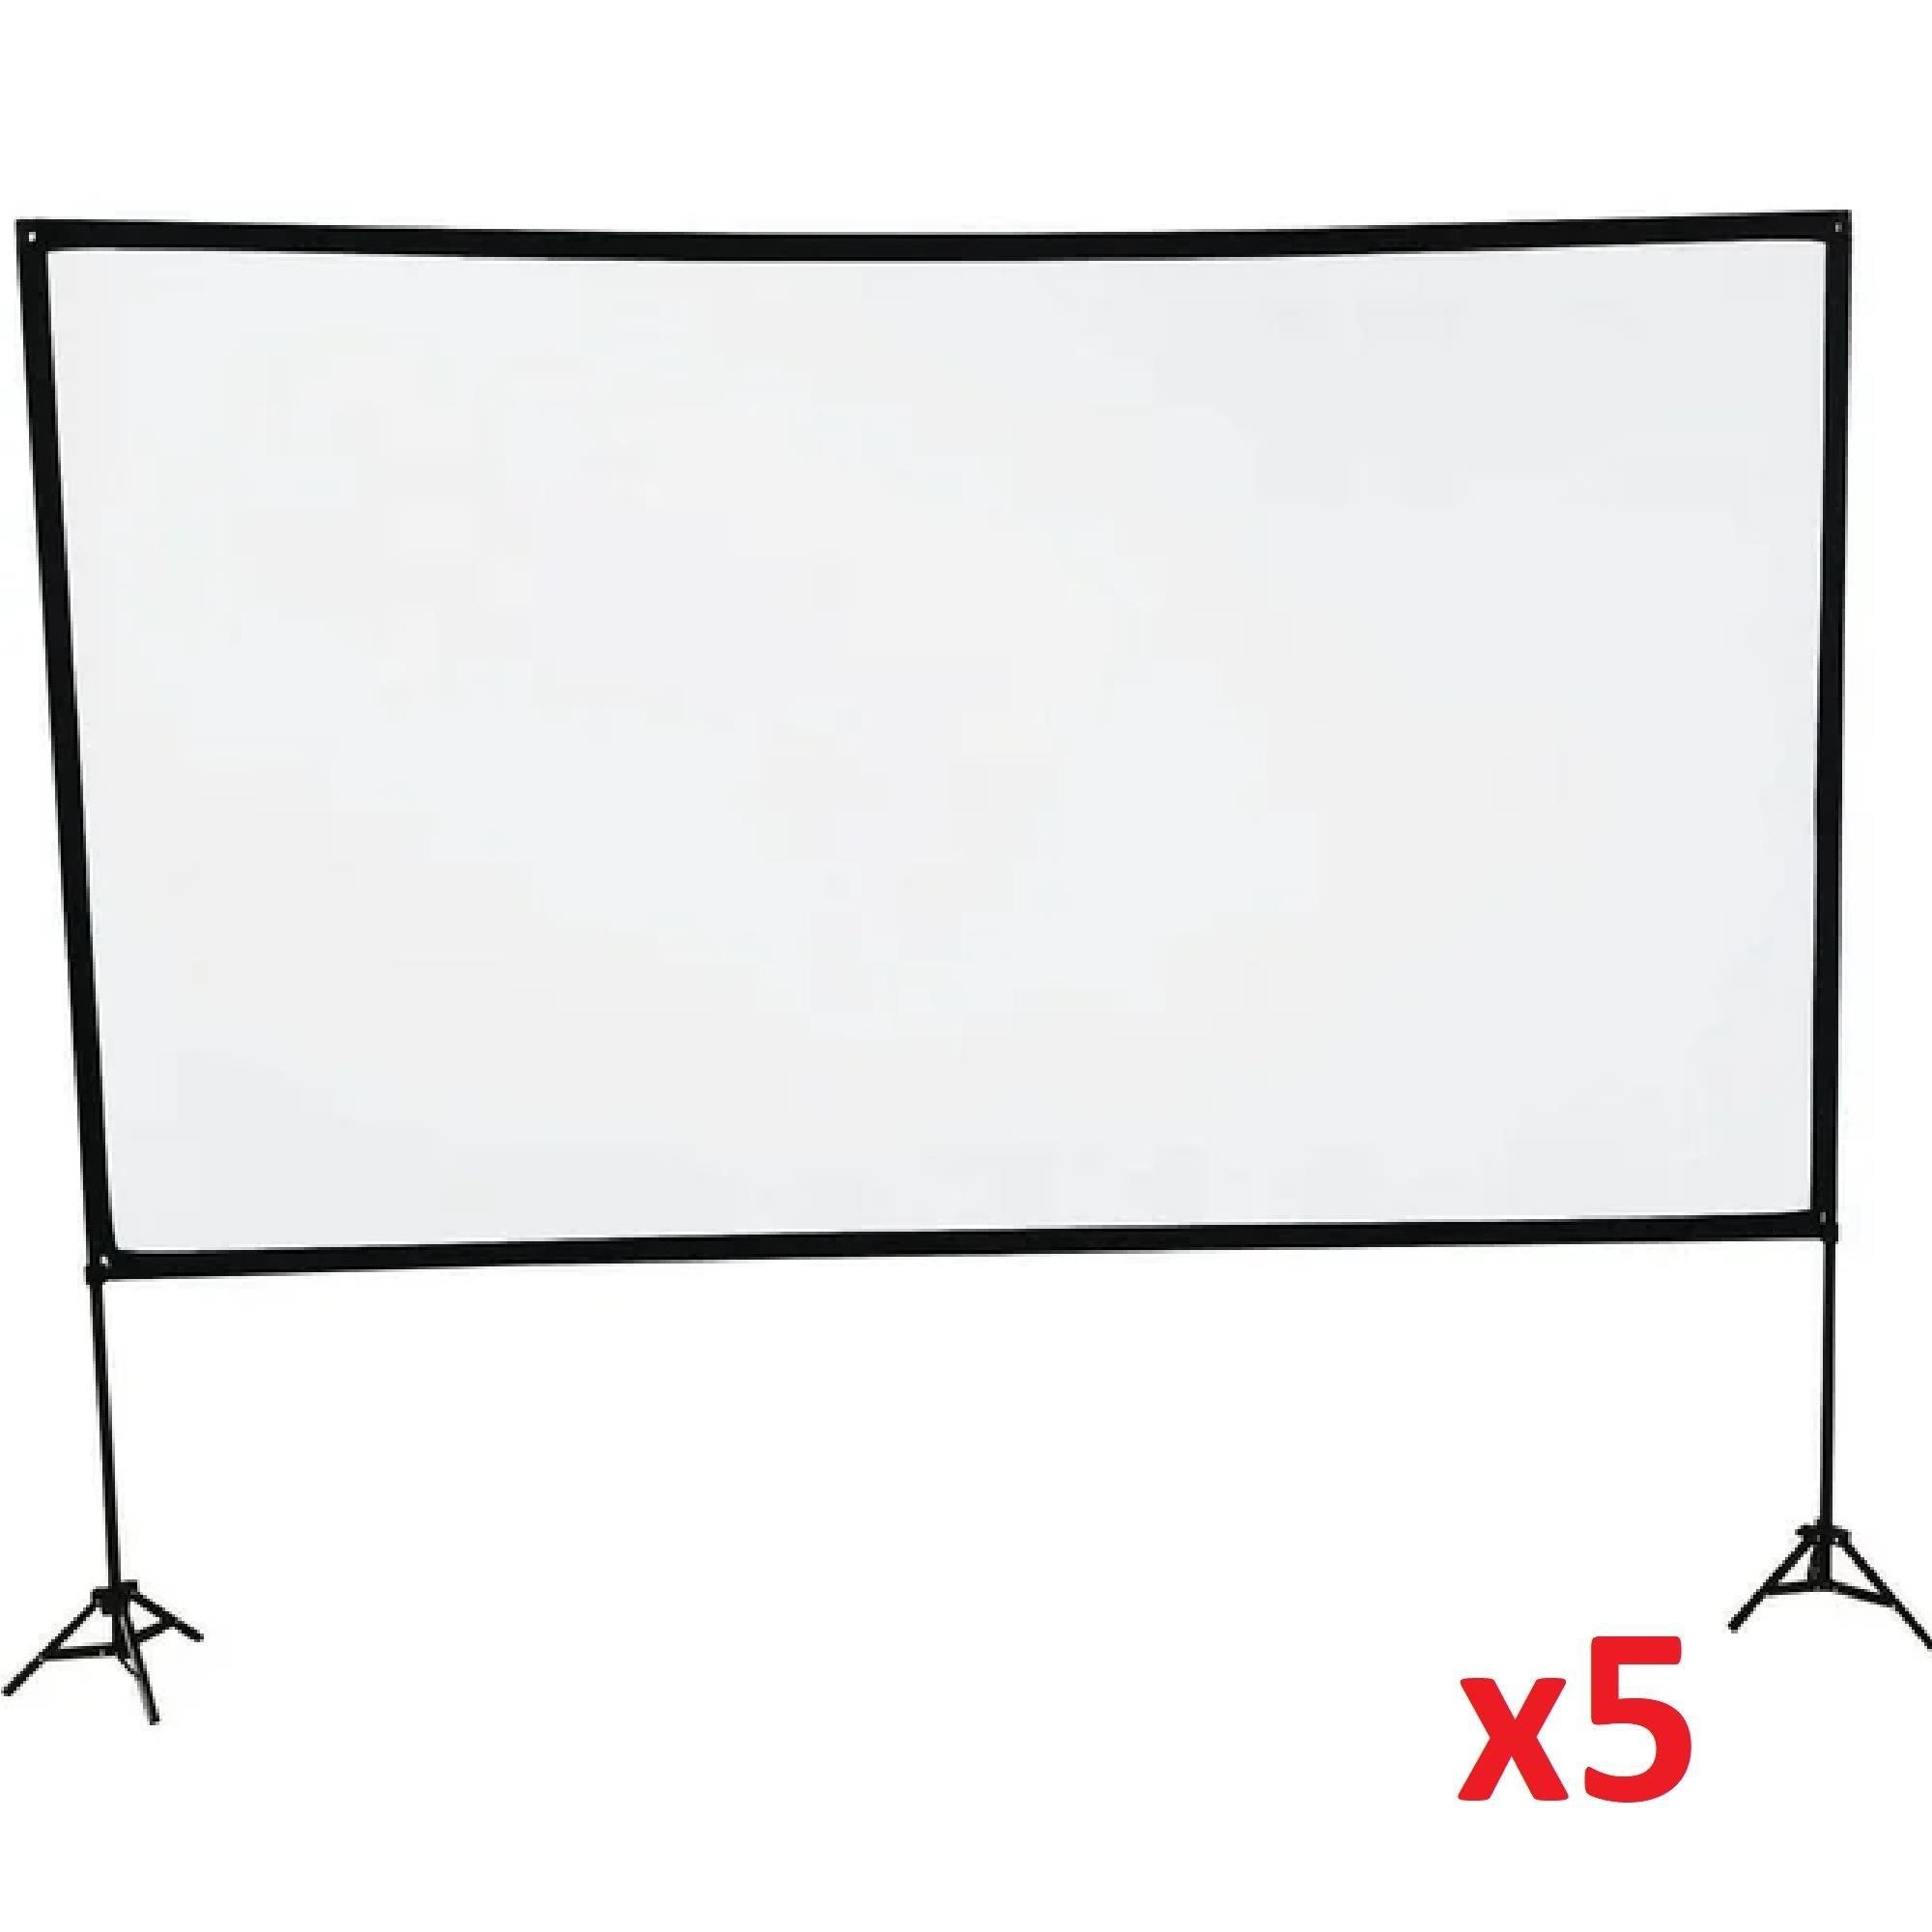 RCA Projector Screen - Lot of 5 - AS-IS